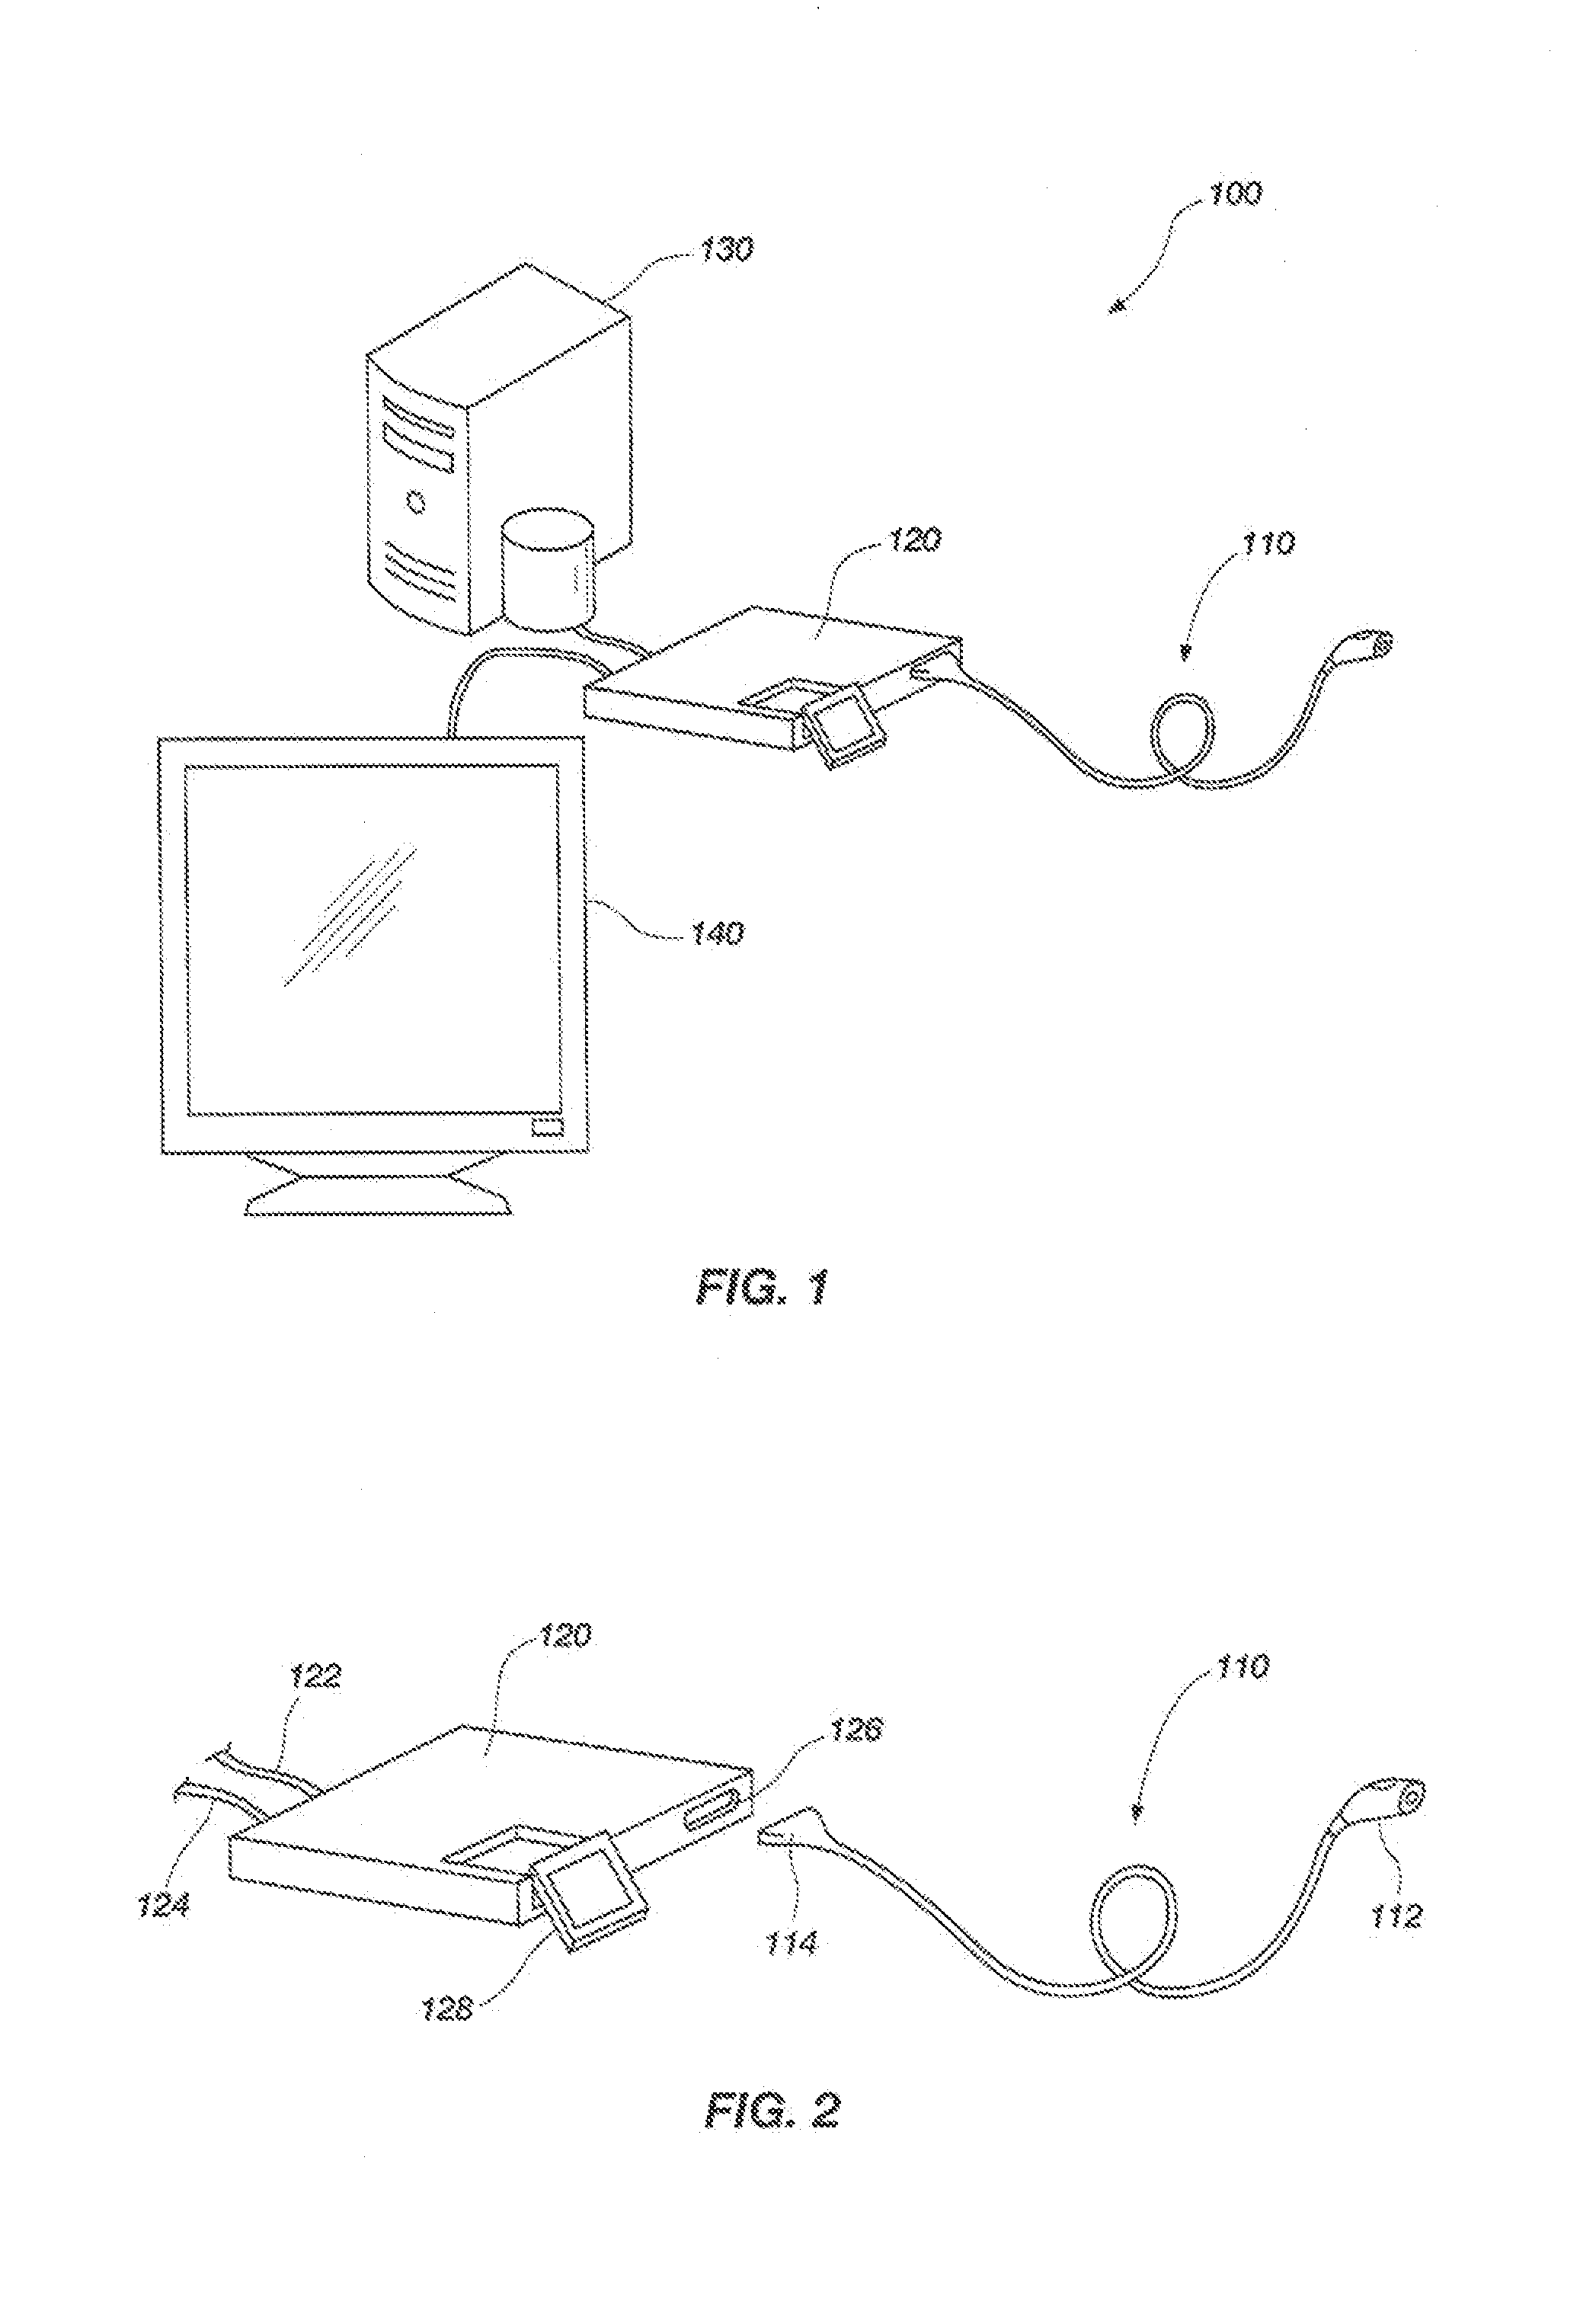 Apparatus, system and method for providing an imaging device for medical applications